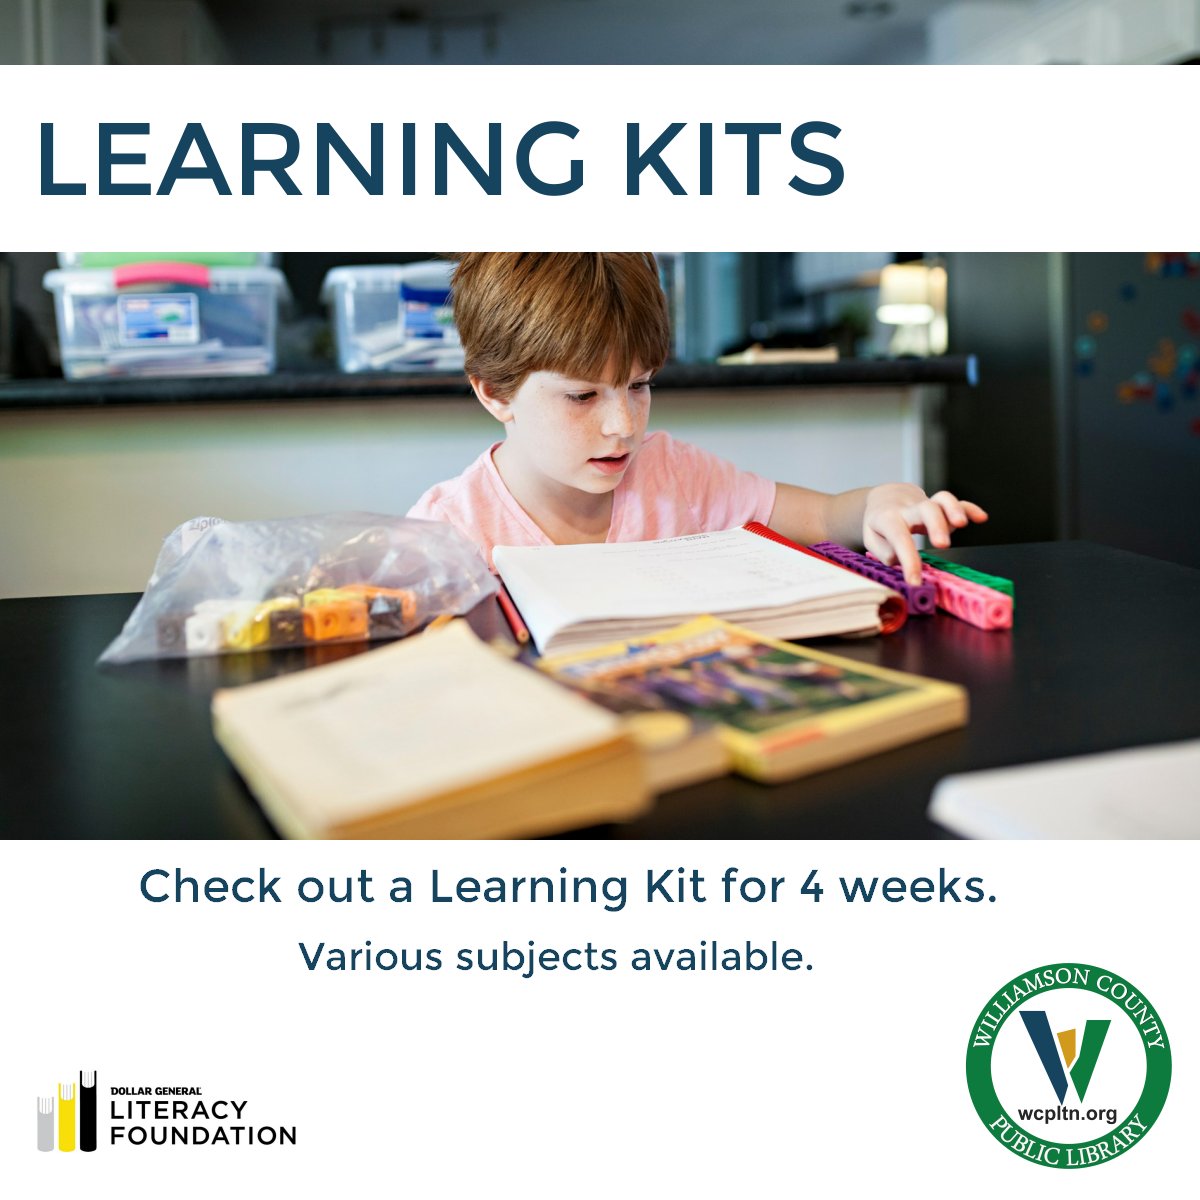 We are excited to now offer Learning Kits. Our goal is to provide families with resources they can use to enhance their children’s education, whether homeschool, public, or private. Made possible by a grant received from Dollar General Literacy Foundation.